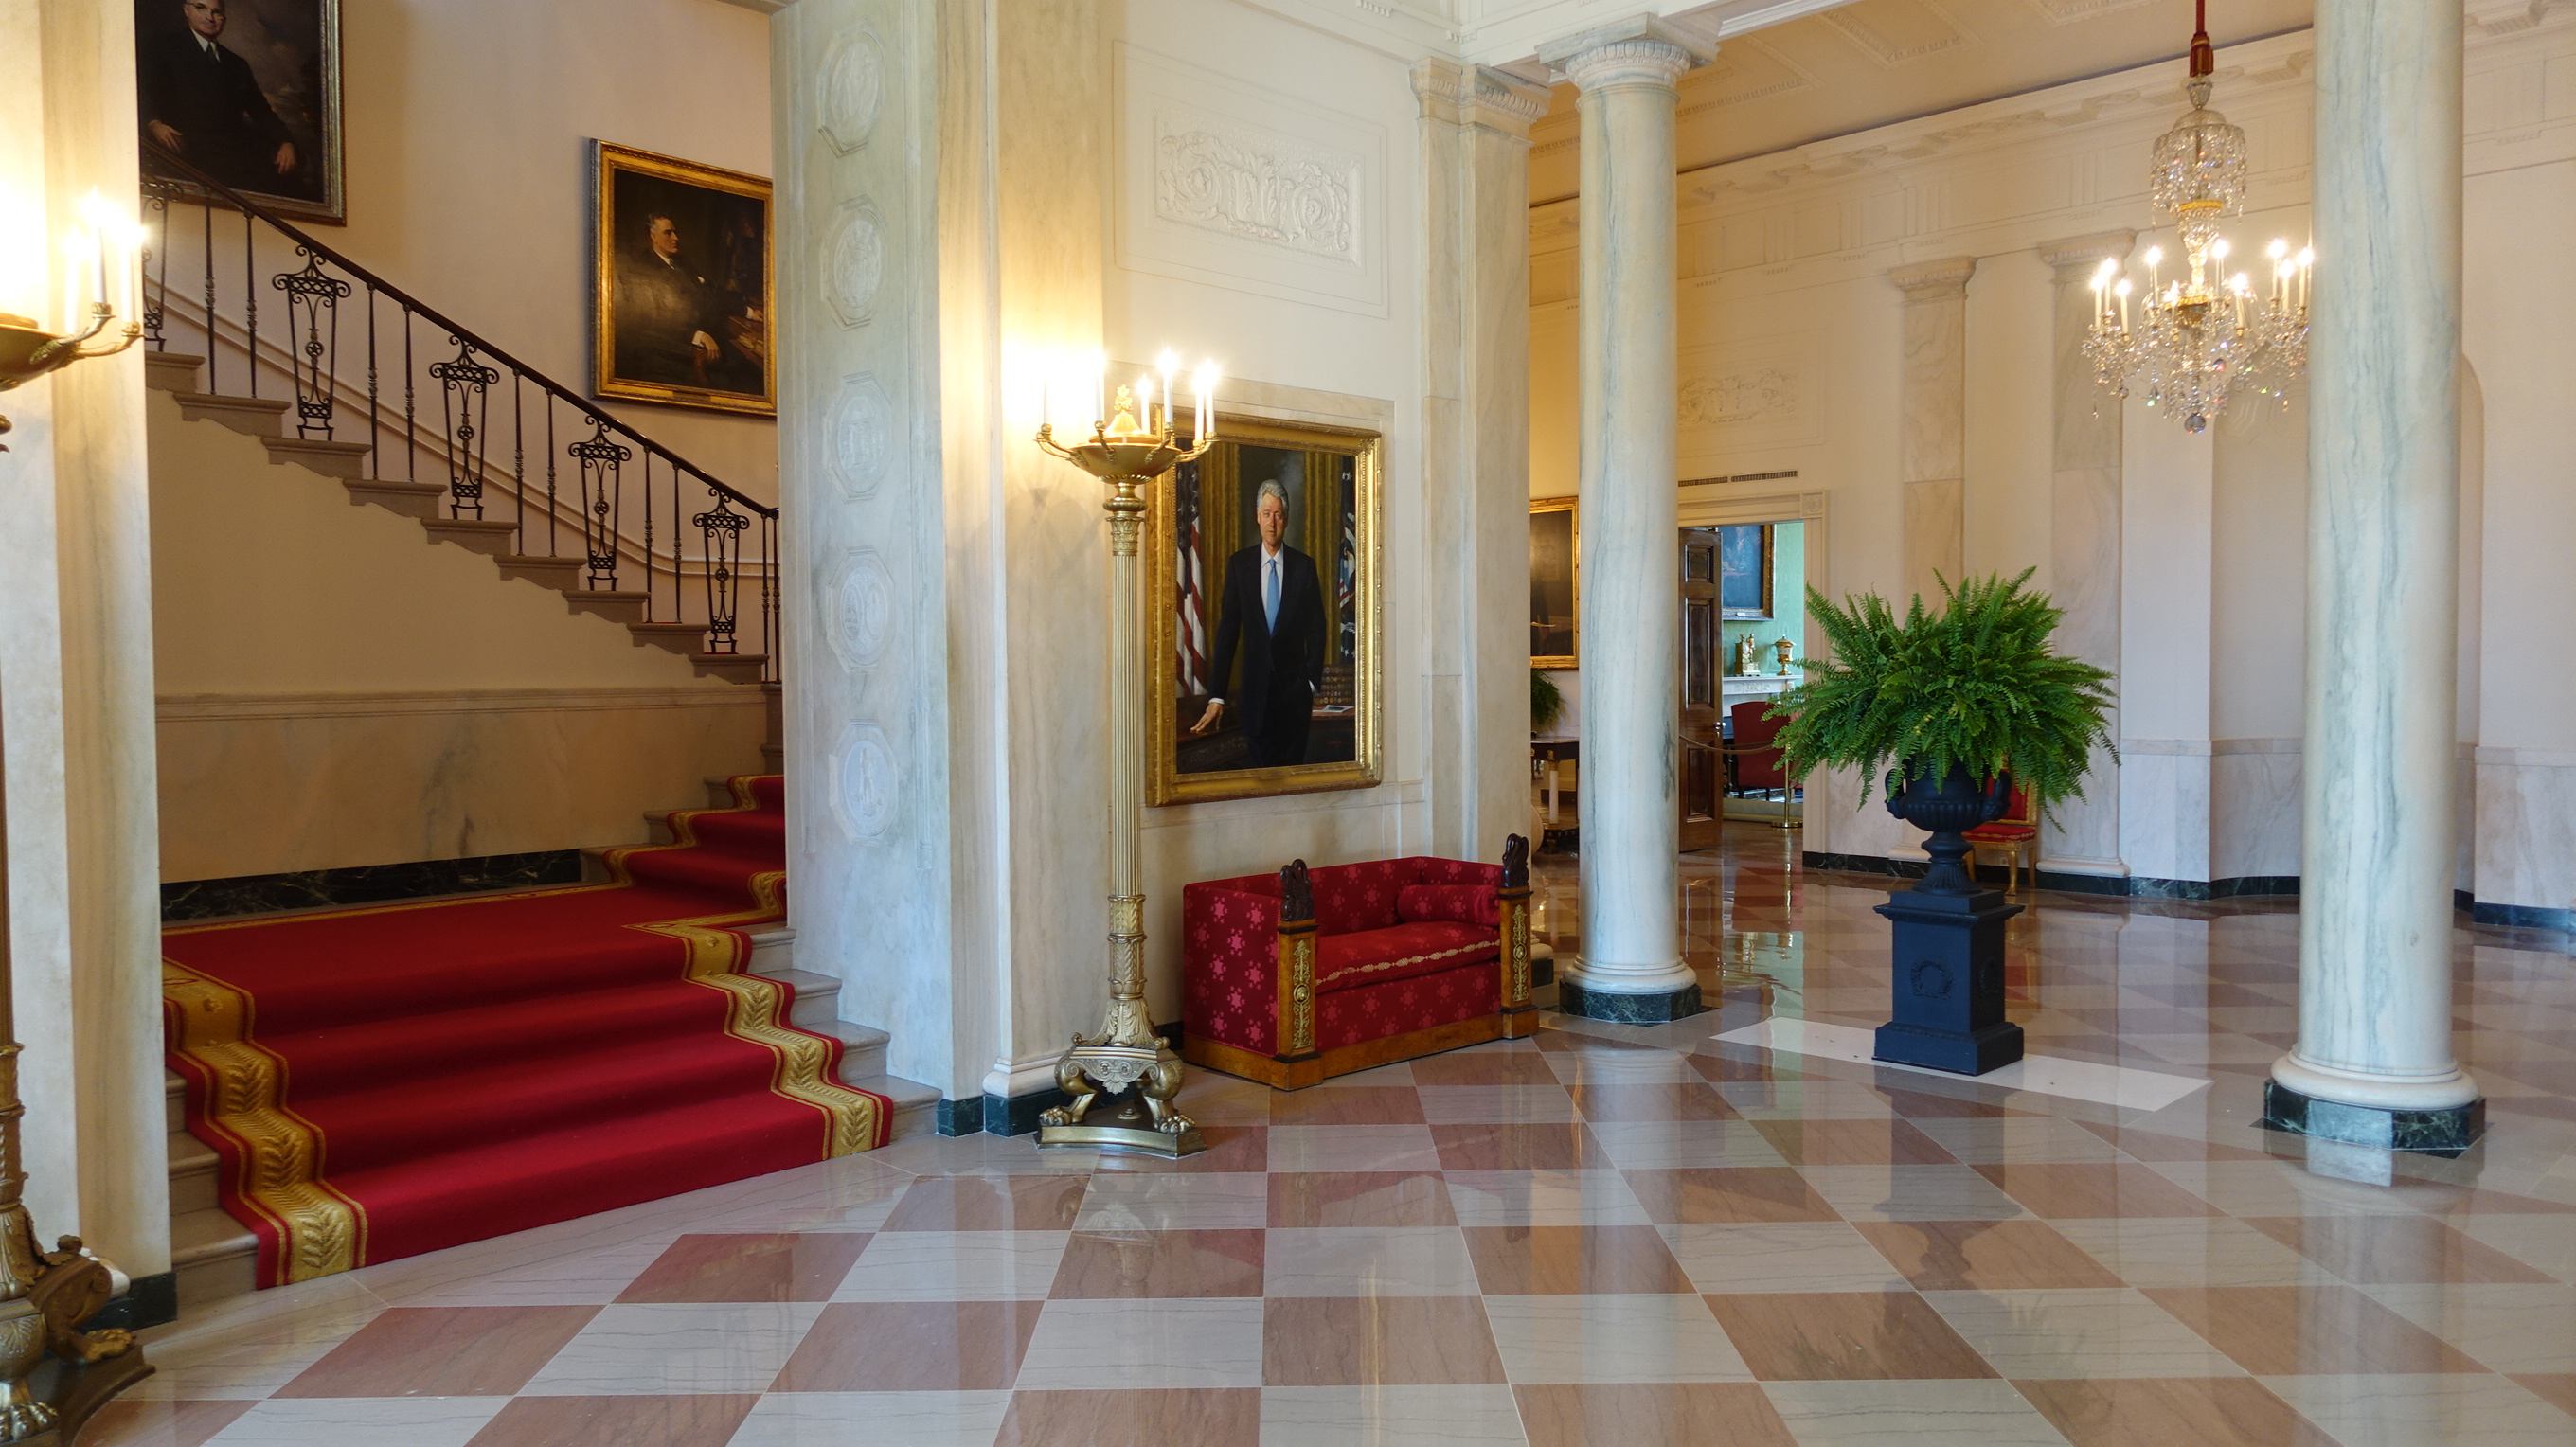 What the White House and Oval Office Look Like After Renovations - InsideHook